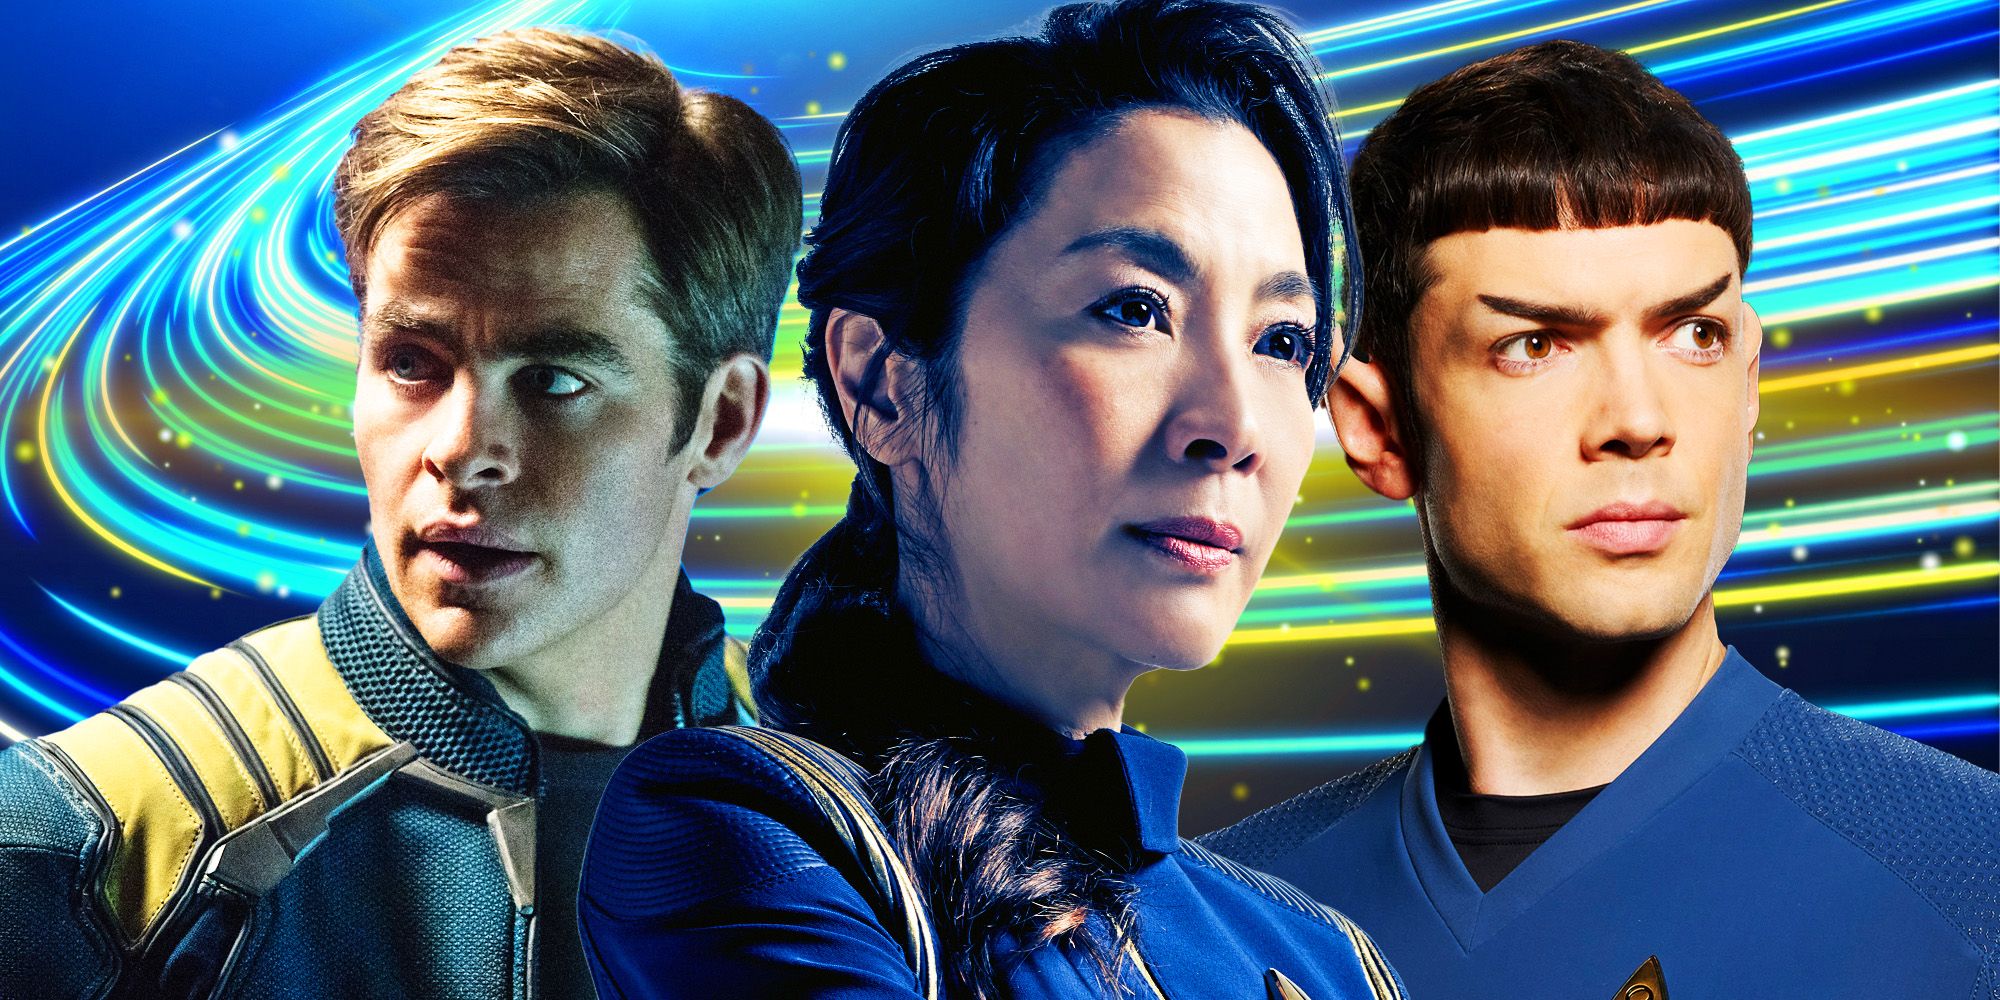 Michelle Yeoh, Chris Pine, and Ethan Peck, all from Star Trek